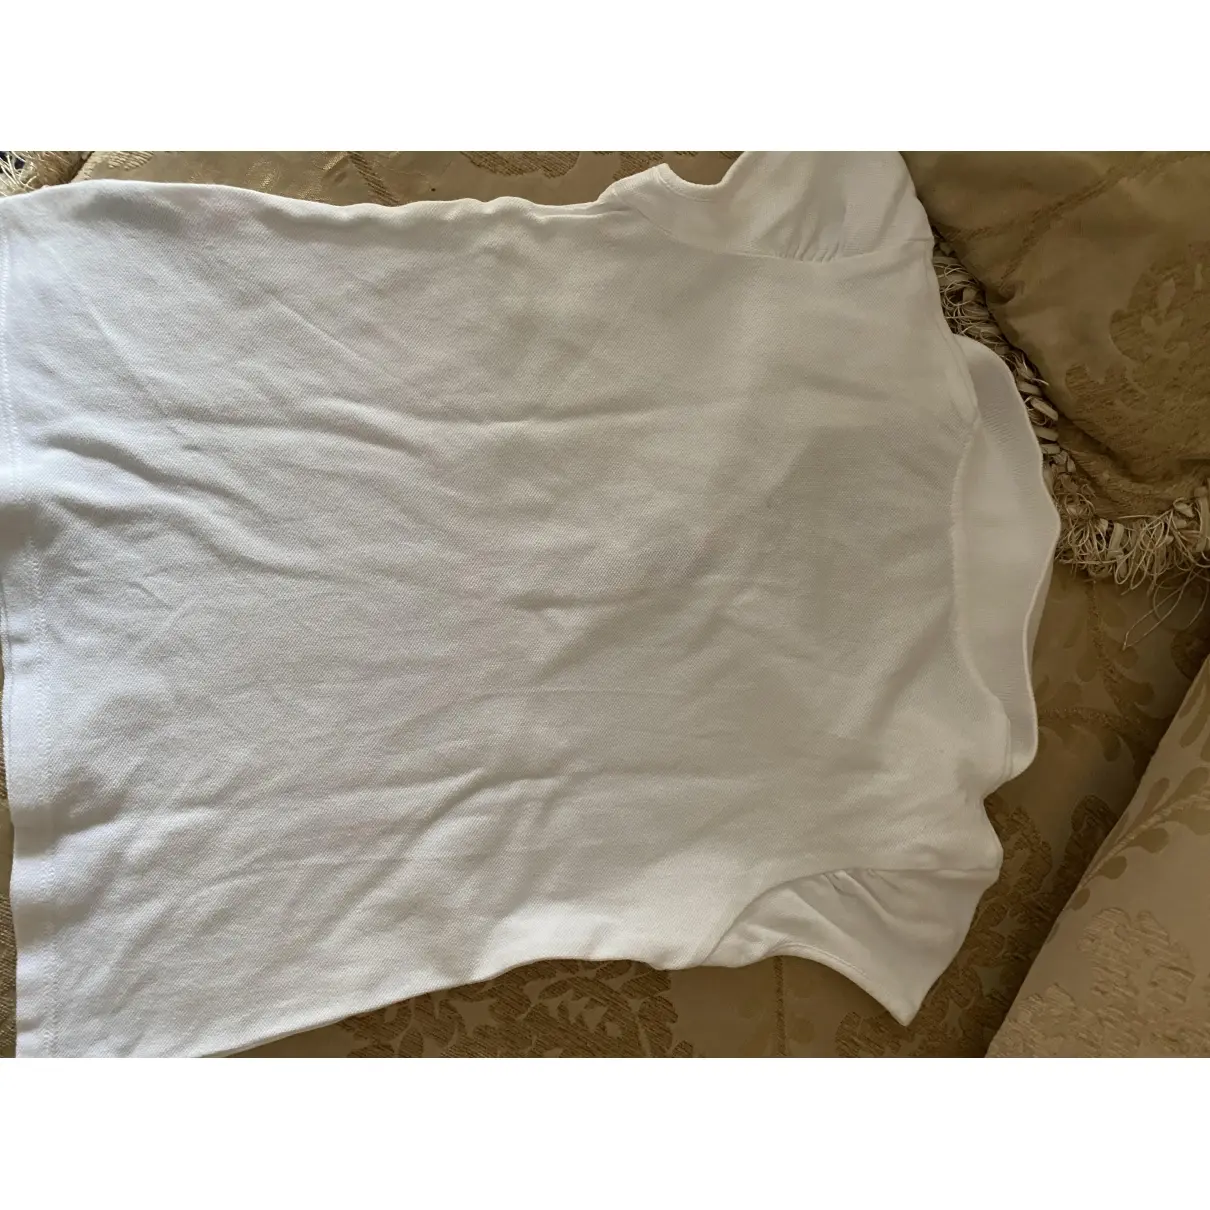 Burberry Top for sale